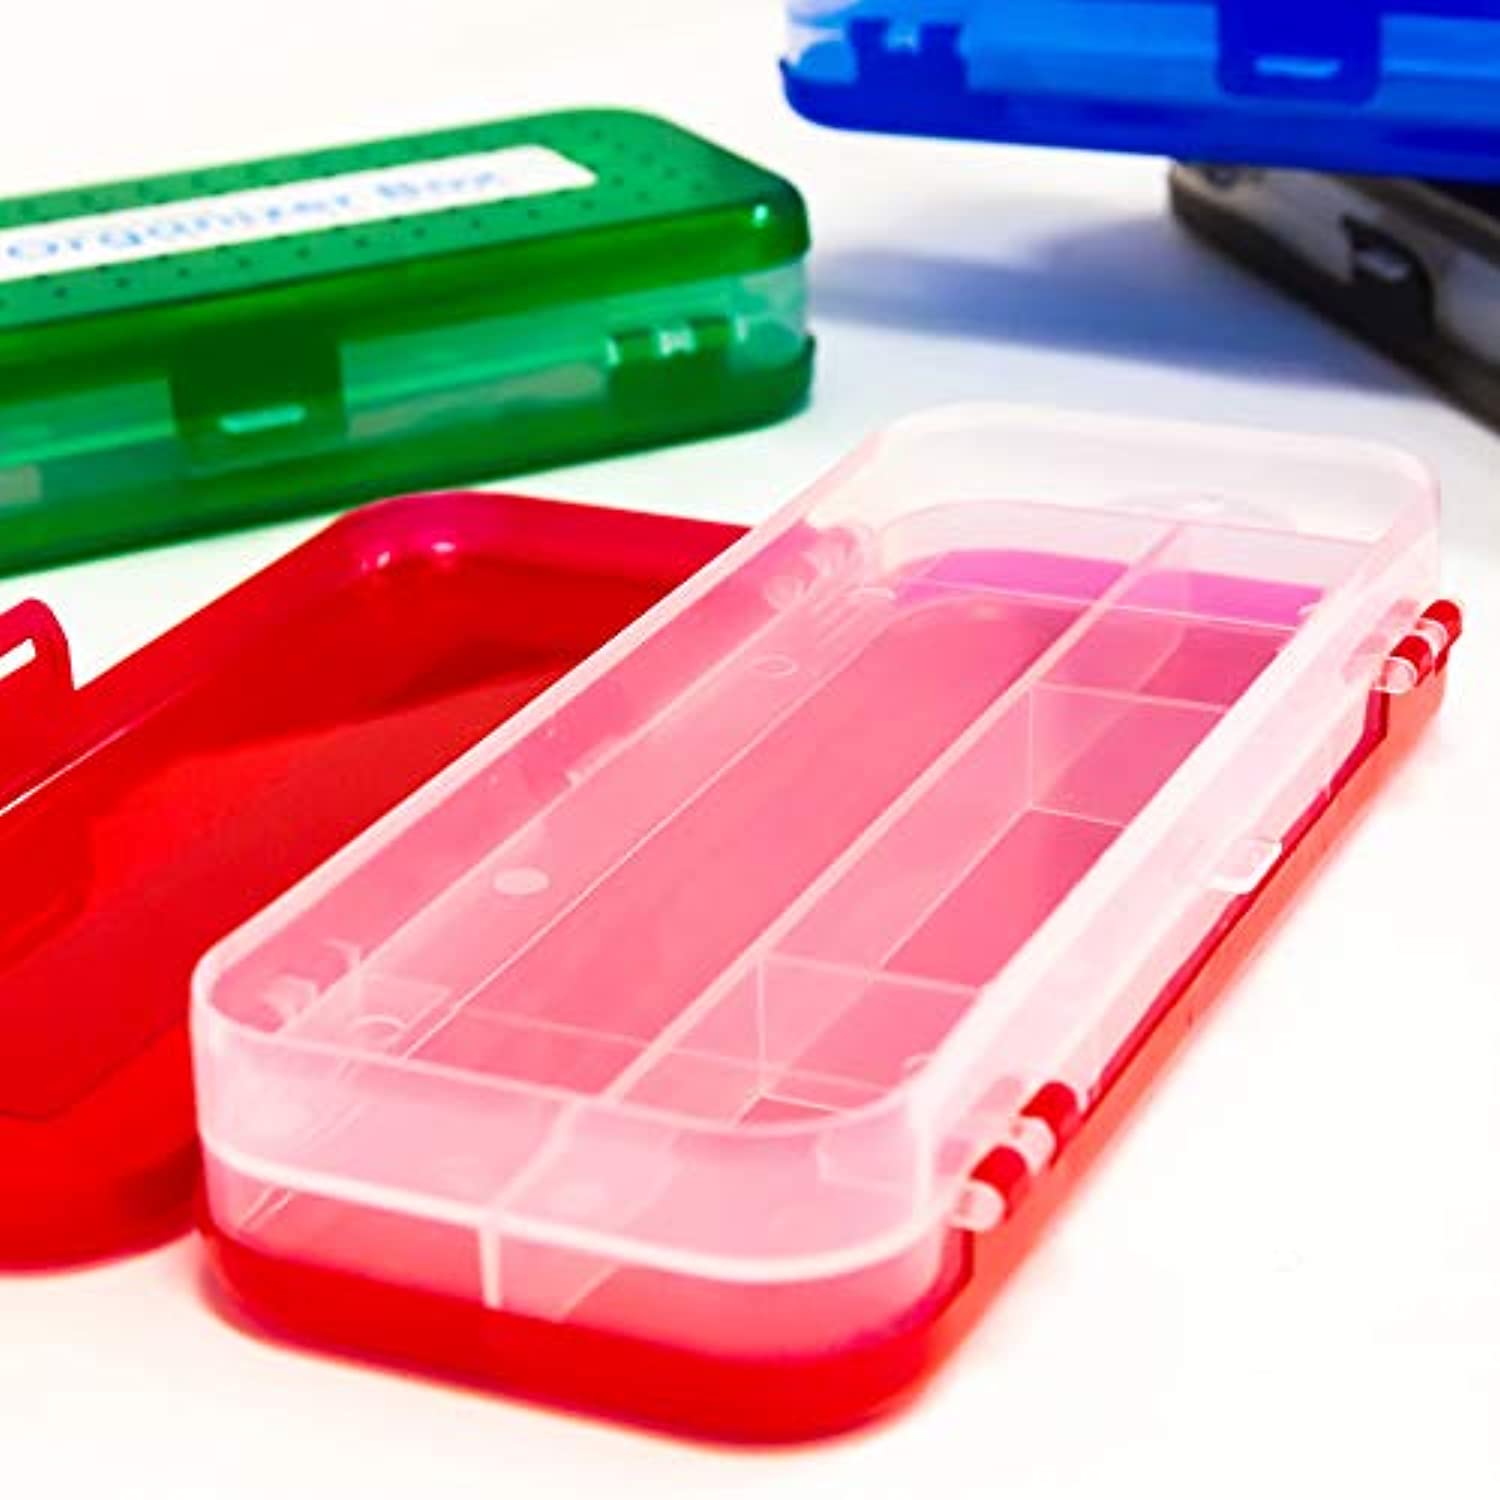 BAZIC 8" Double Deck Organizer Box, Cubby Bin Pencil box Storage Desk Plastic Organizer Holder, Assorted COLORS MAY VARY, for Pen Pencil College Student Kids School Supplies Office, 4-Pack.